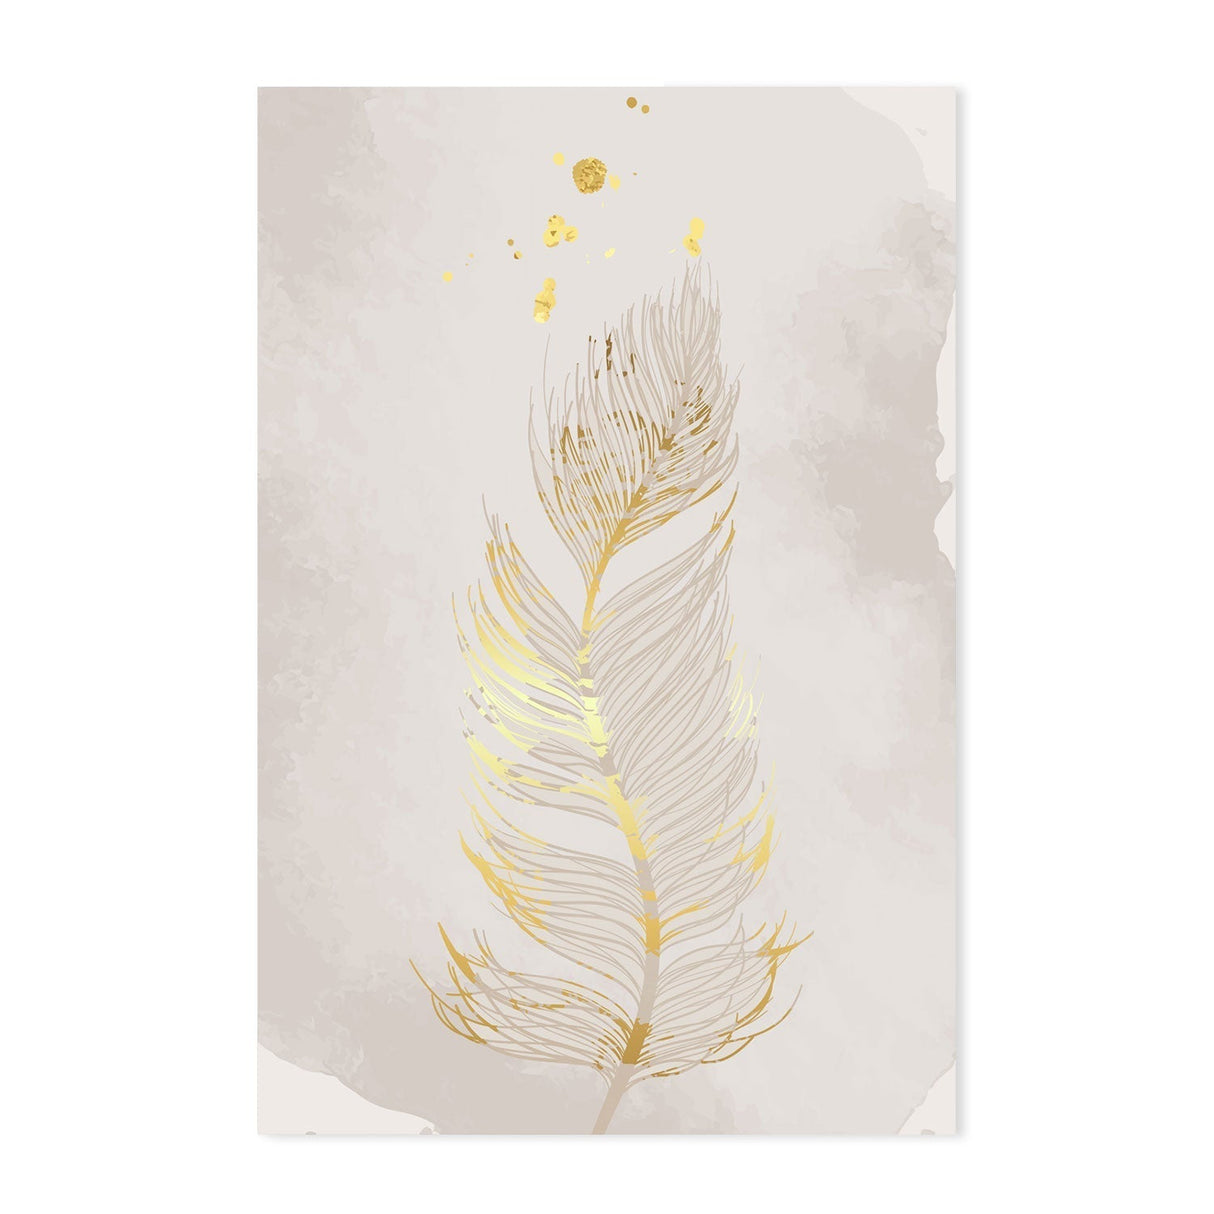 wall-art-print-canvas-poster-framed-Gold Feather, Style A, B & C, Set Of 3-GIOIA-WALL-ART